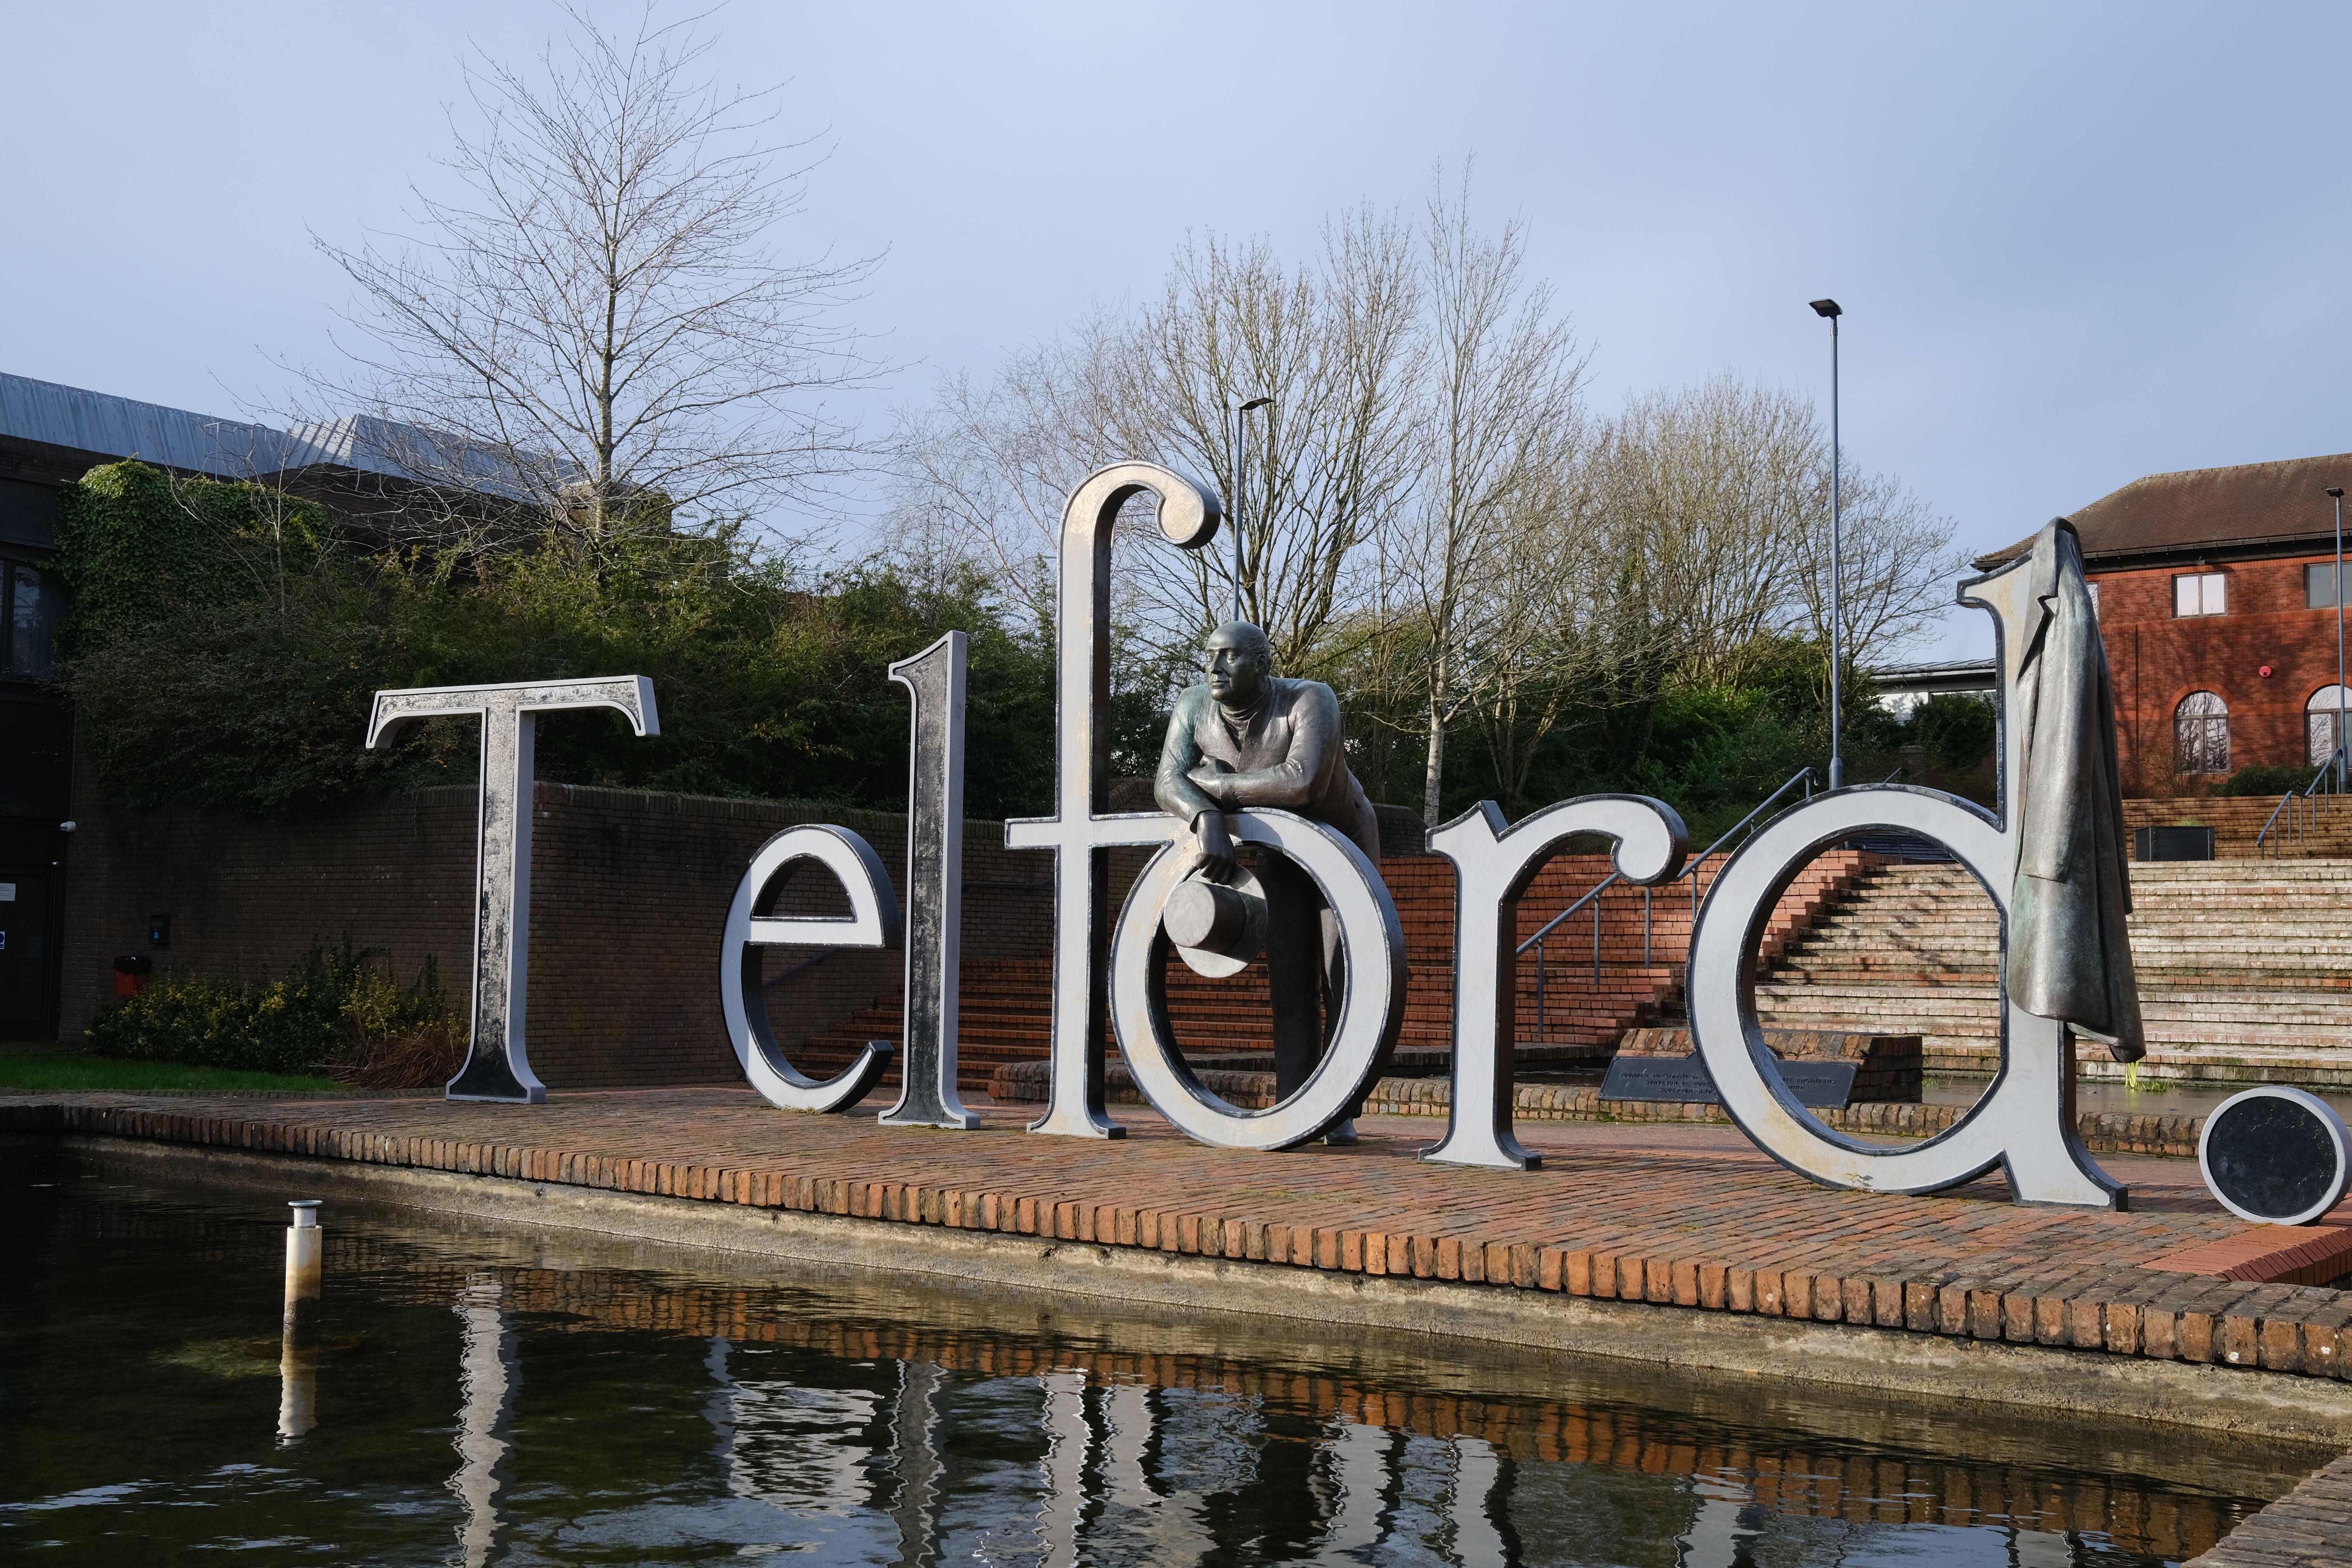 More than a thousand children were sexually exploited over at least 30 years in Telford amid “shocking” police and council failings, an inquiry has concluded (Alamy/PA)